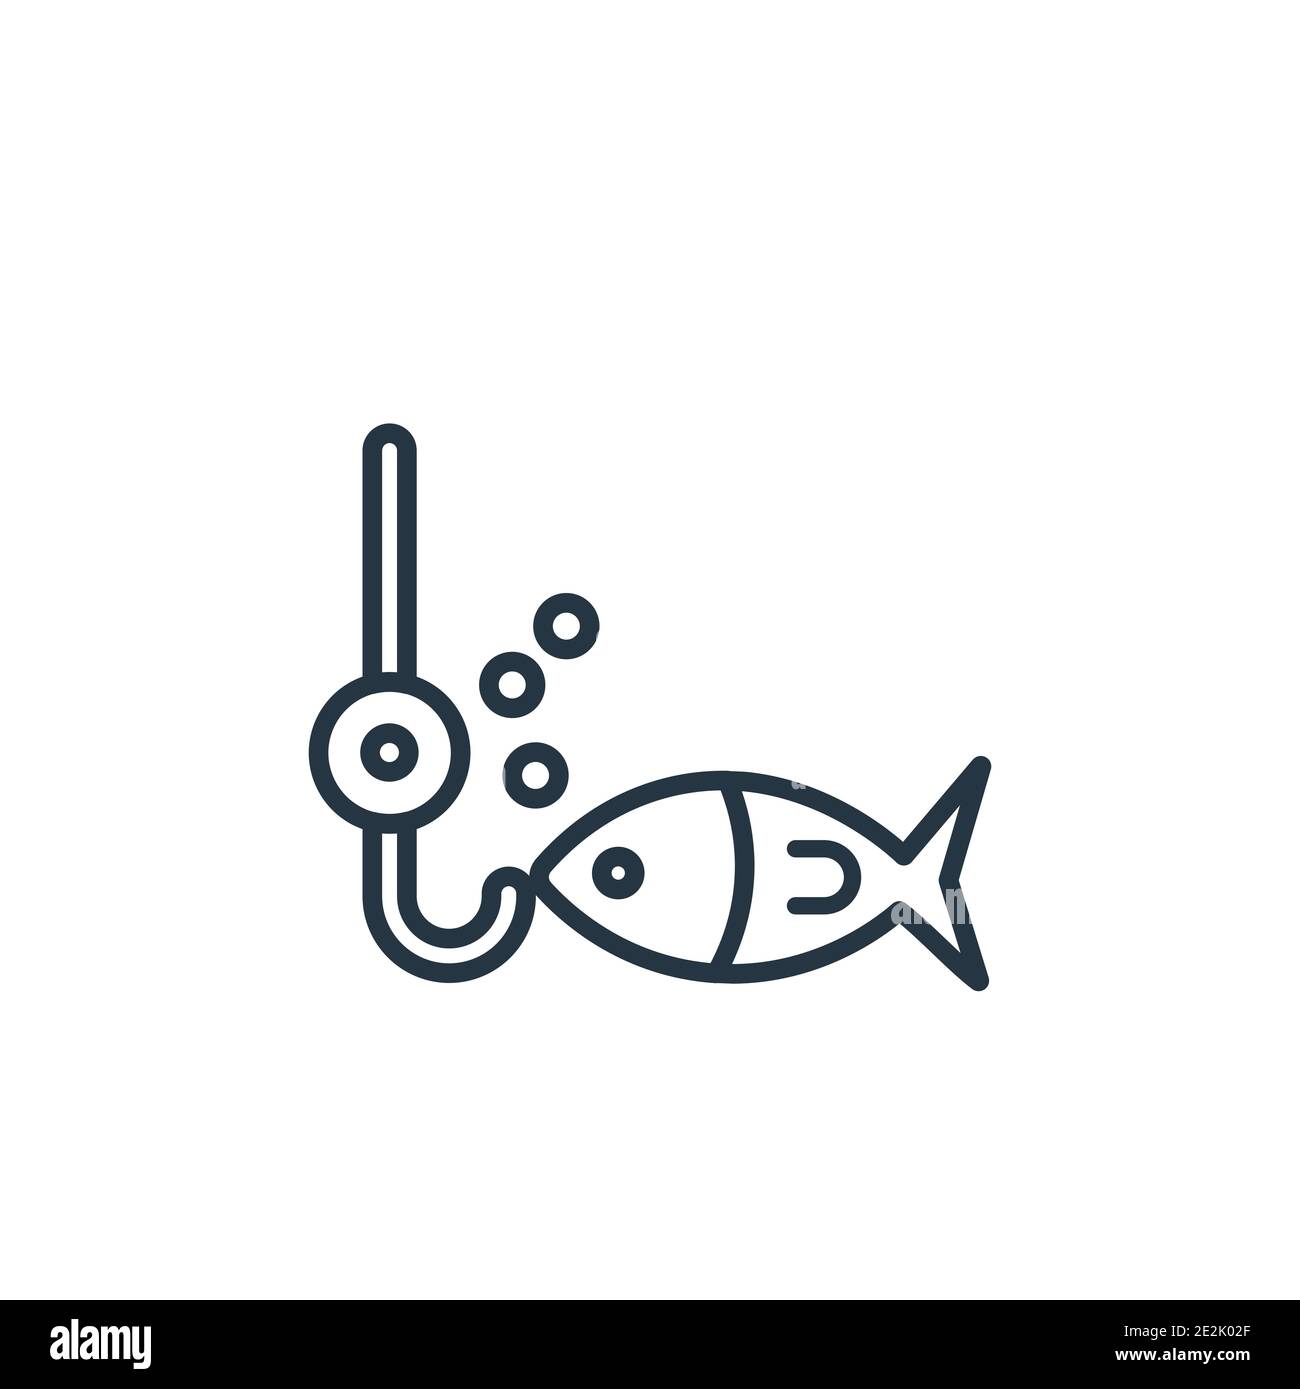 https://c8.alamy.com/comp/2E2K02F/fishing-line-outline-vector-icon-thin-line-black-fishing-line-icon-flat-vector-simple-element-illustration-from-editable-food-concept-isolated-strok-2E2K02F.jpg